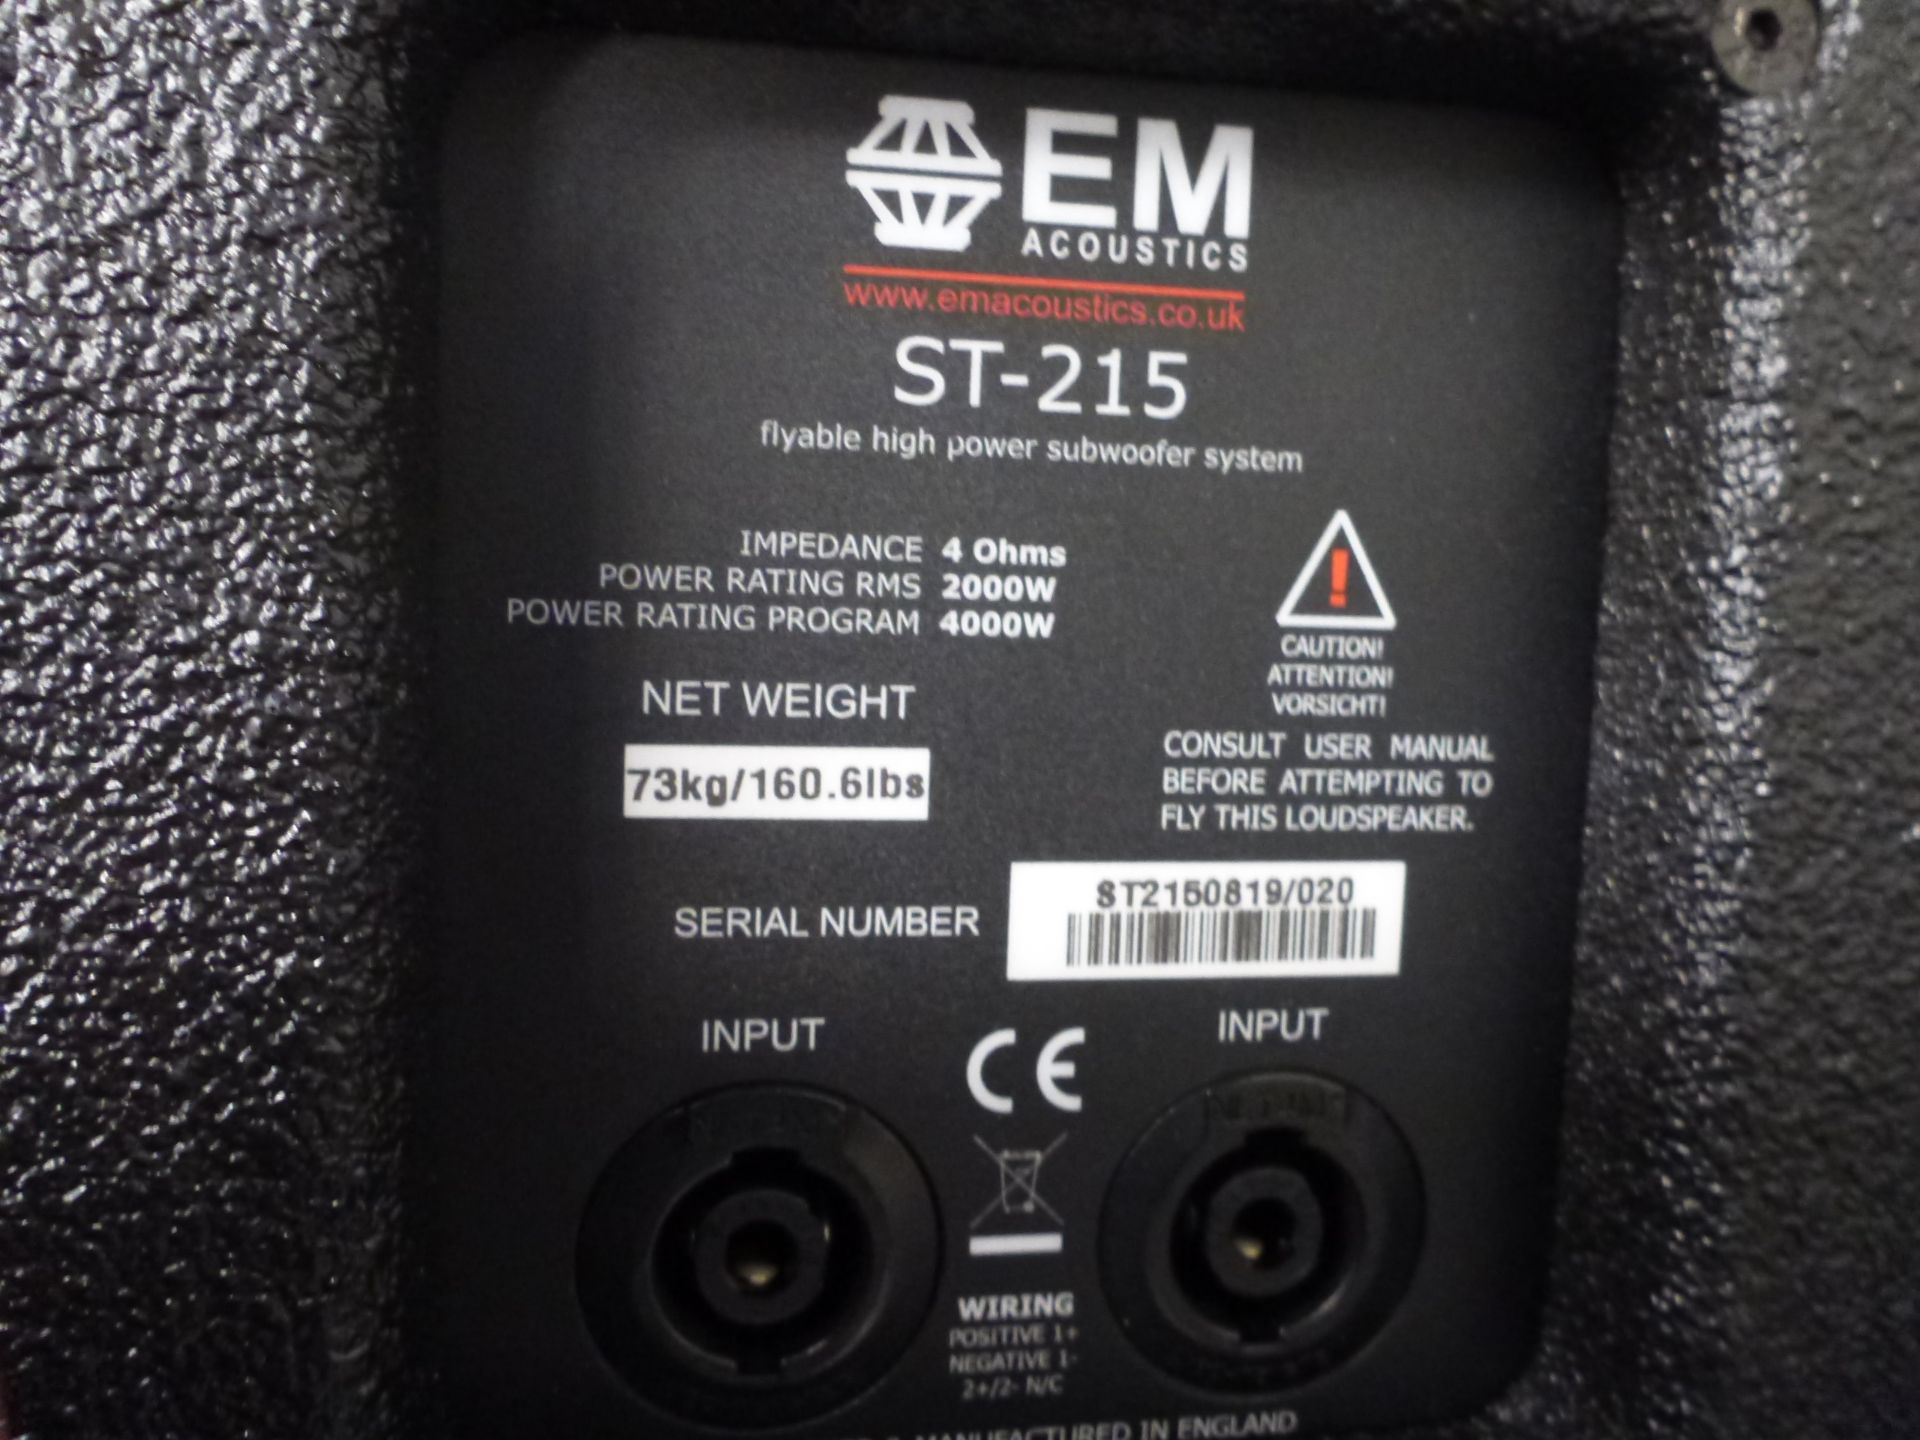 EM Acoustics ST-215 Dual 15" Flyable High Power Subwoofer, Includes padded cover, S/N ST2150819/020 - Image 5 of 7